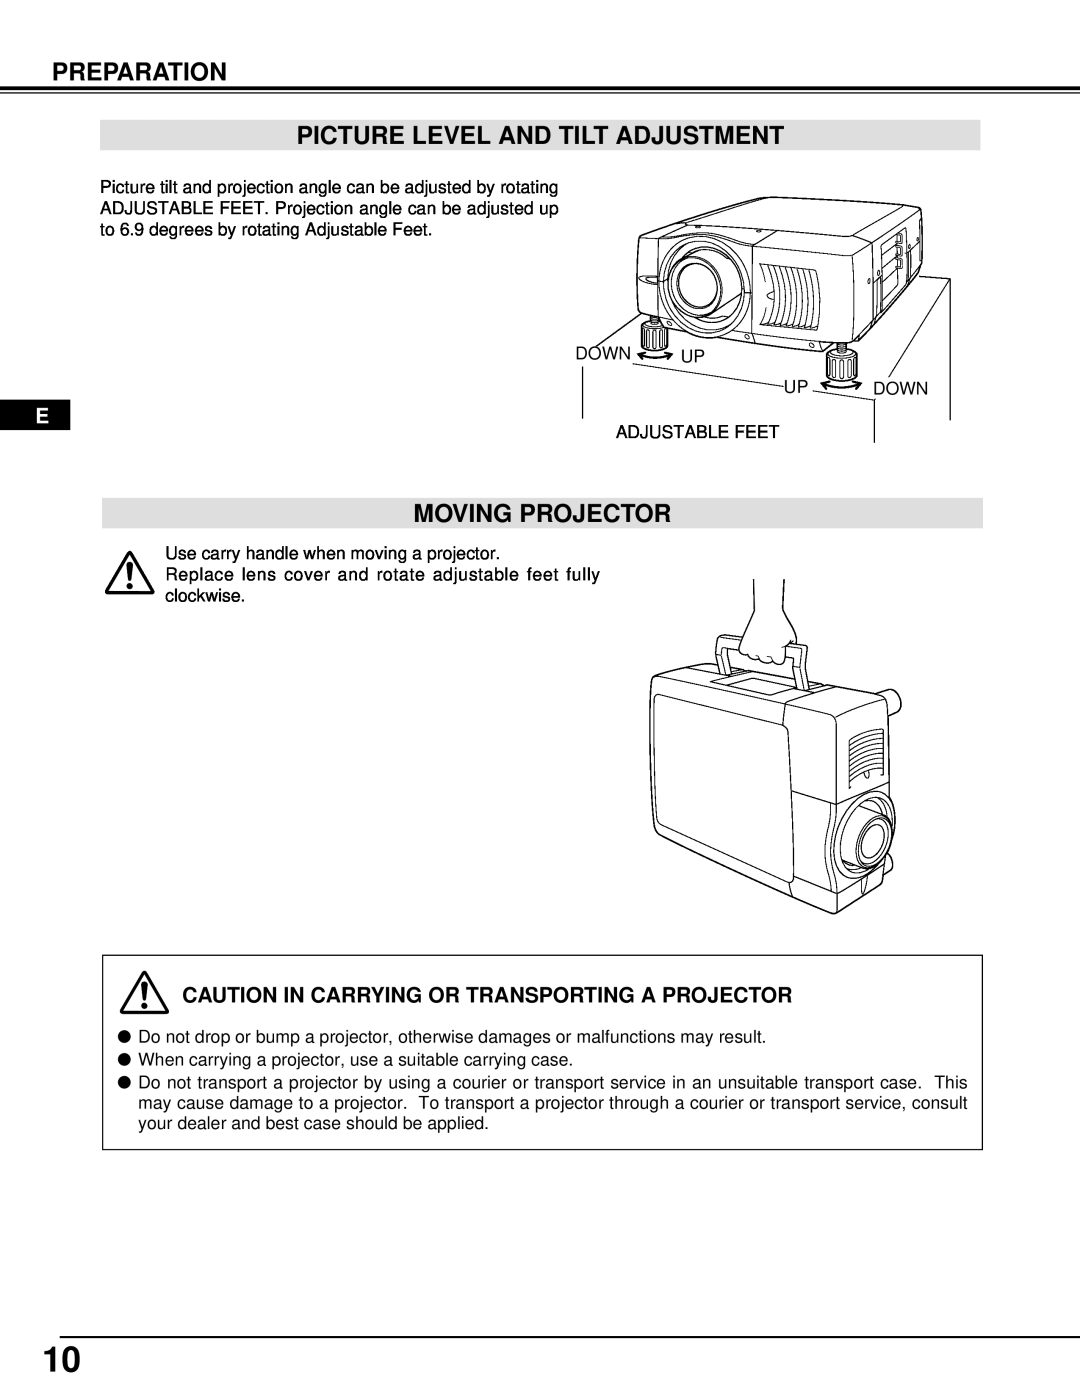 Dukane 28A9058, 28A8945 manual Preparation Picture Level And Tilt Adjustment, Moving Projector 